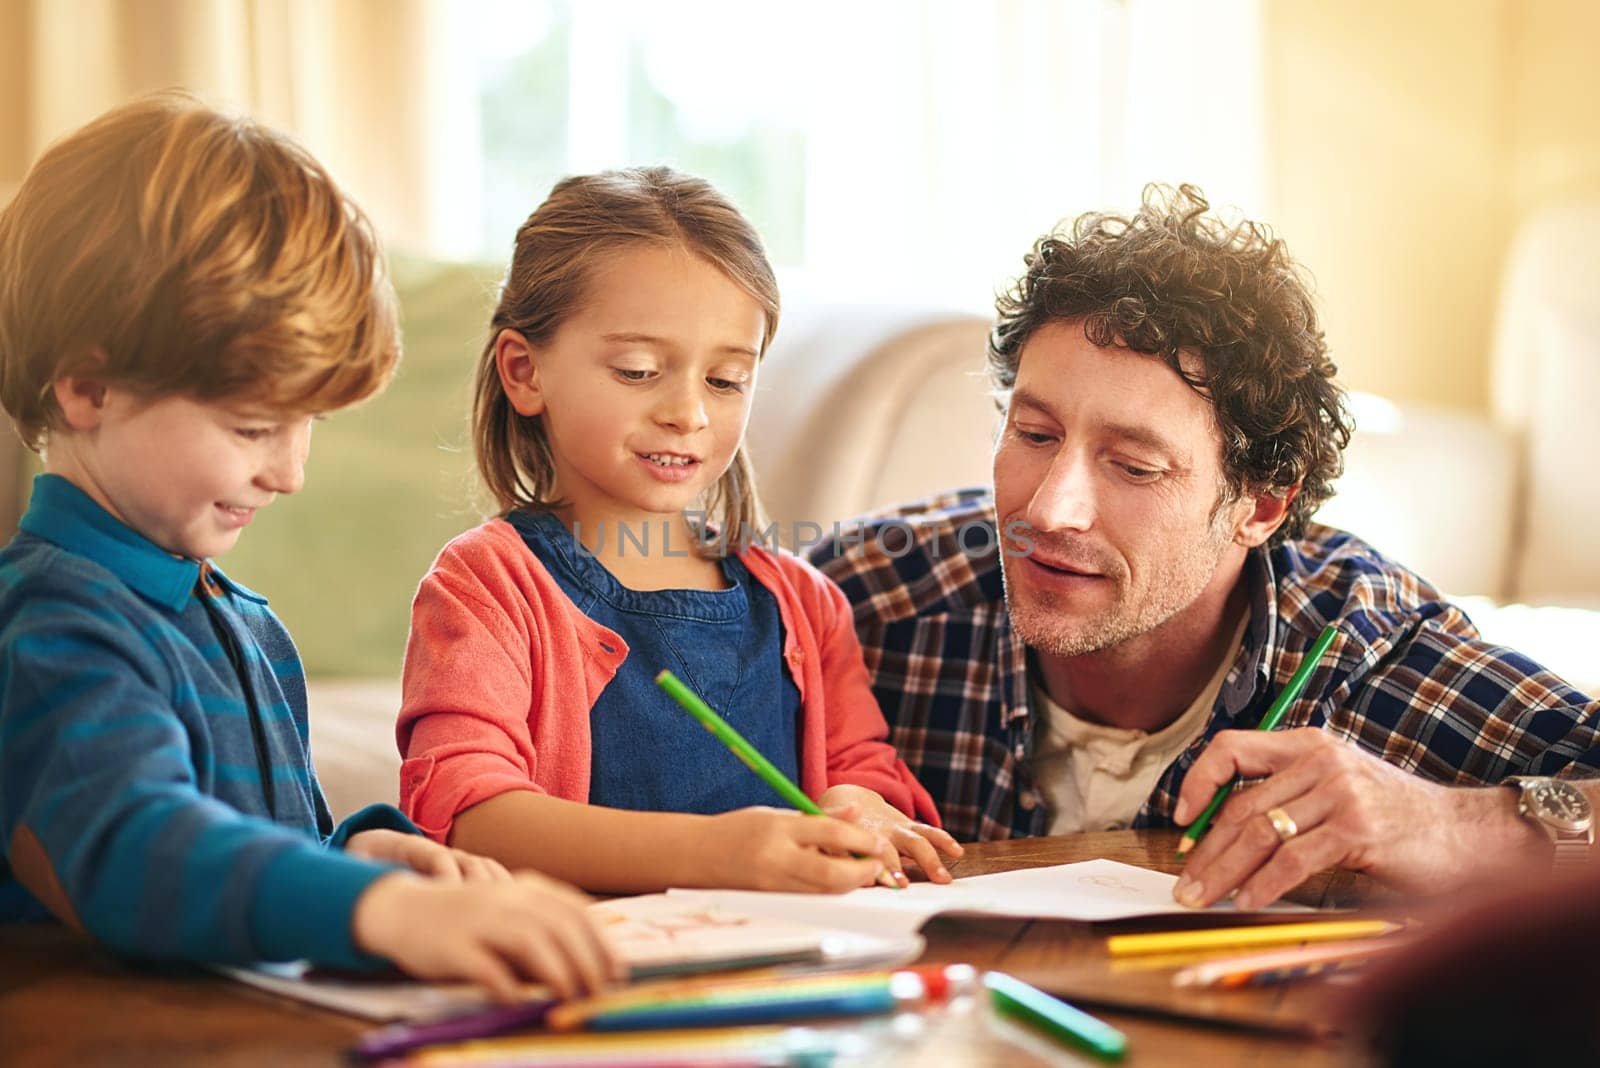 Father, kids and colour pencils for parenthood, fun learning and bonding on holiday or weekend. Dad, children and sibling with book stationery in lounge for drawing indoor activities with in home by YuriArcurs